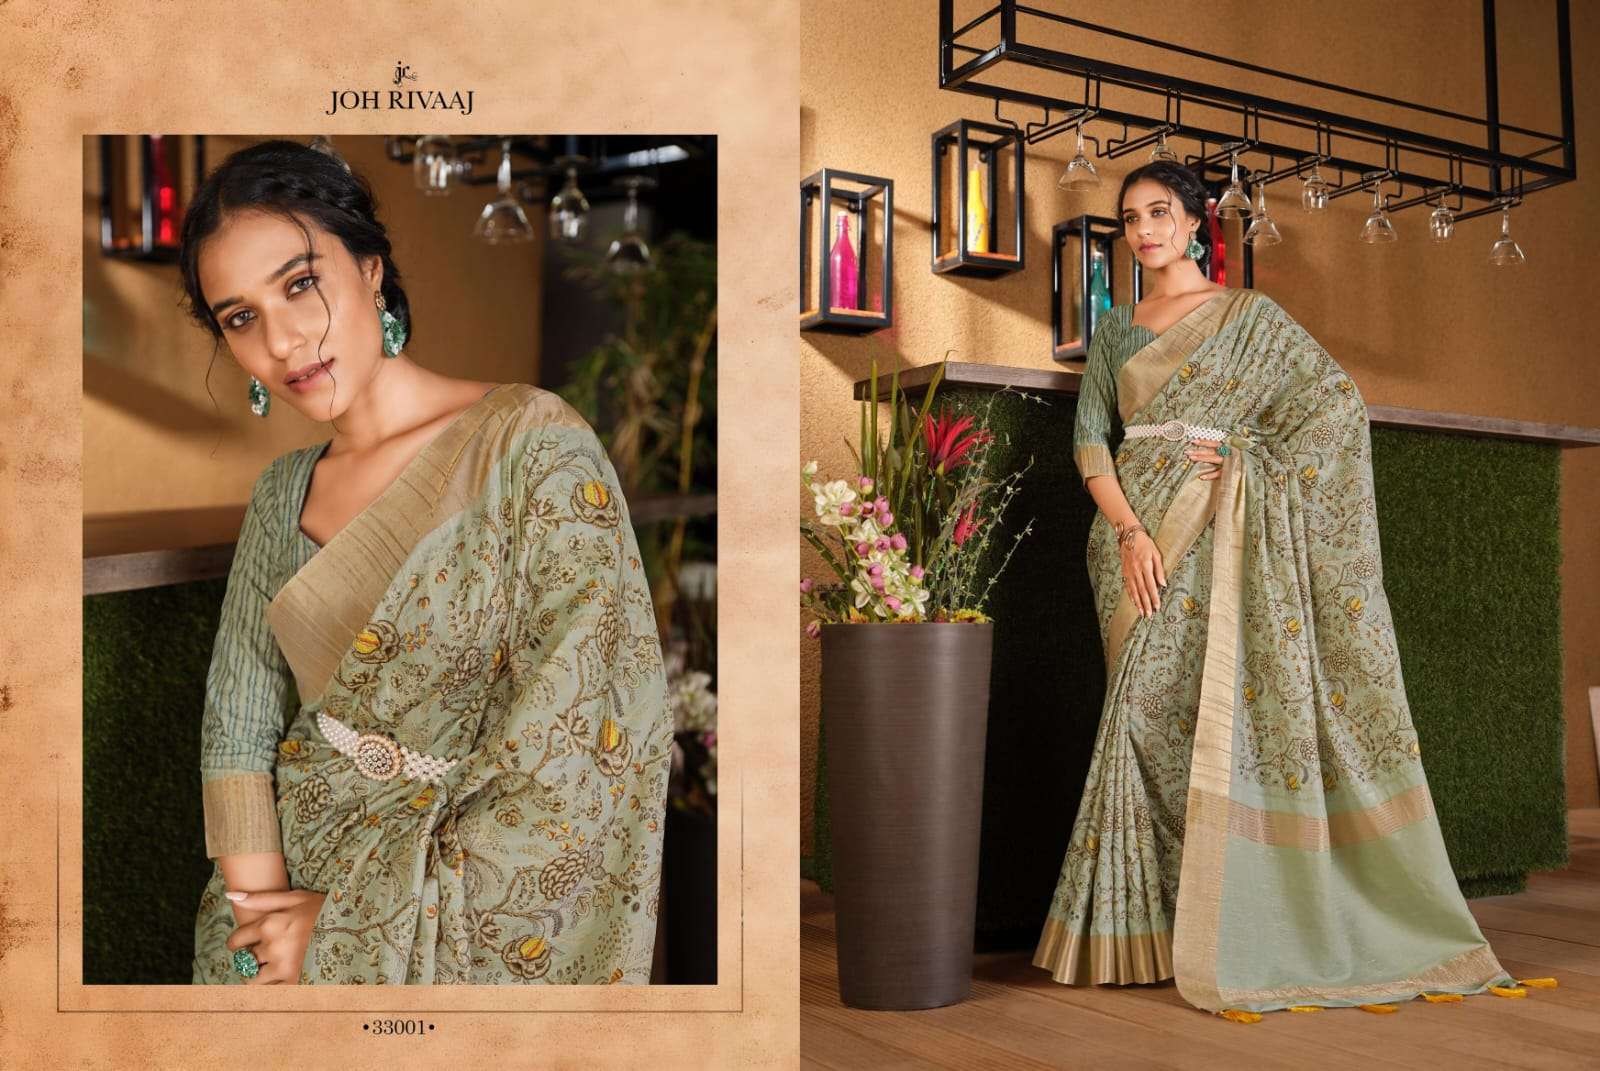 Yellow Chapai Vol 4 Joh Rivaaj New Latest Exclusive Silk Saree Collection  9505 - The Ethnic World